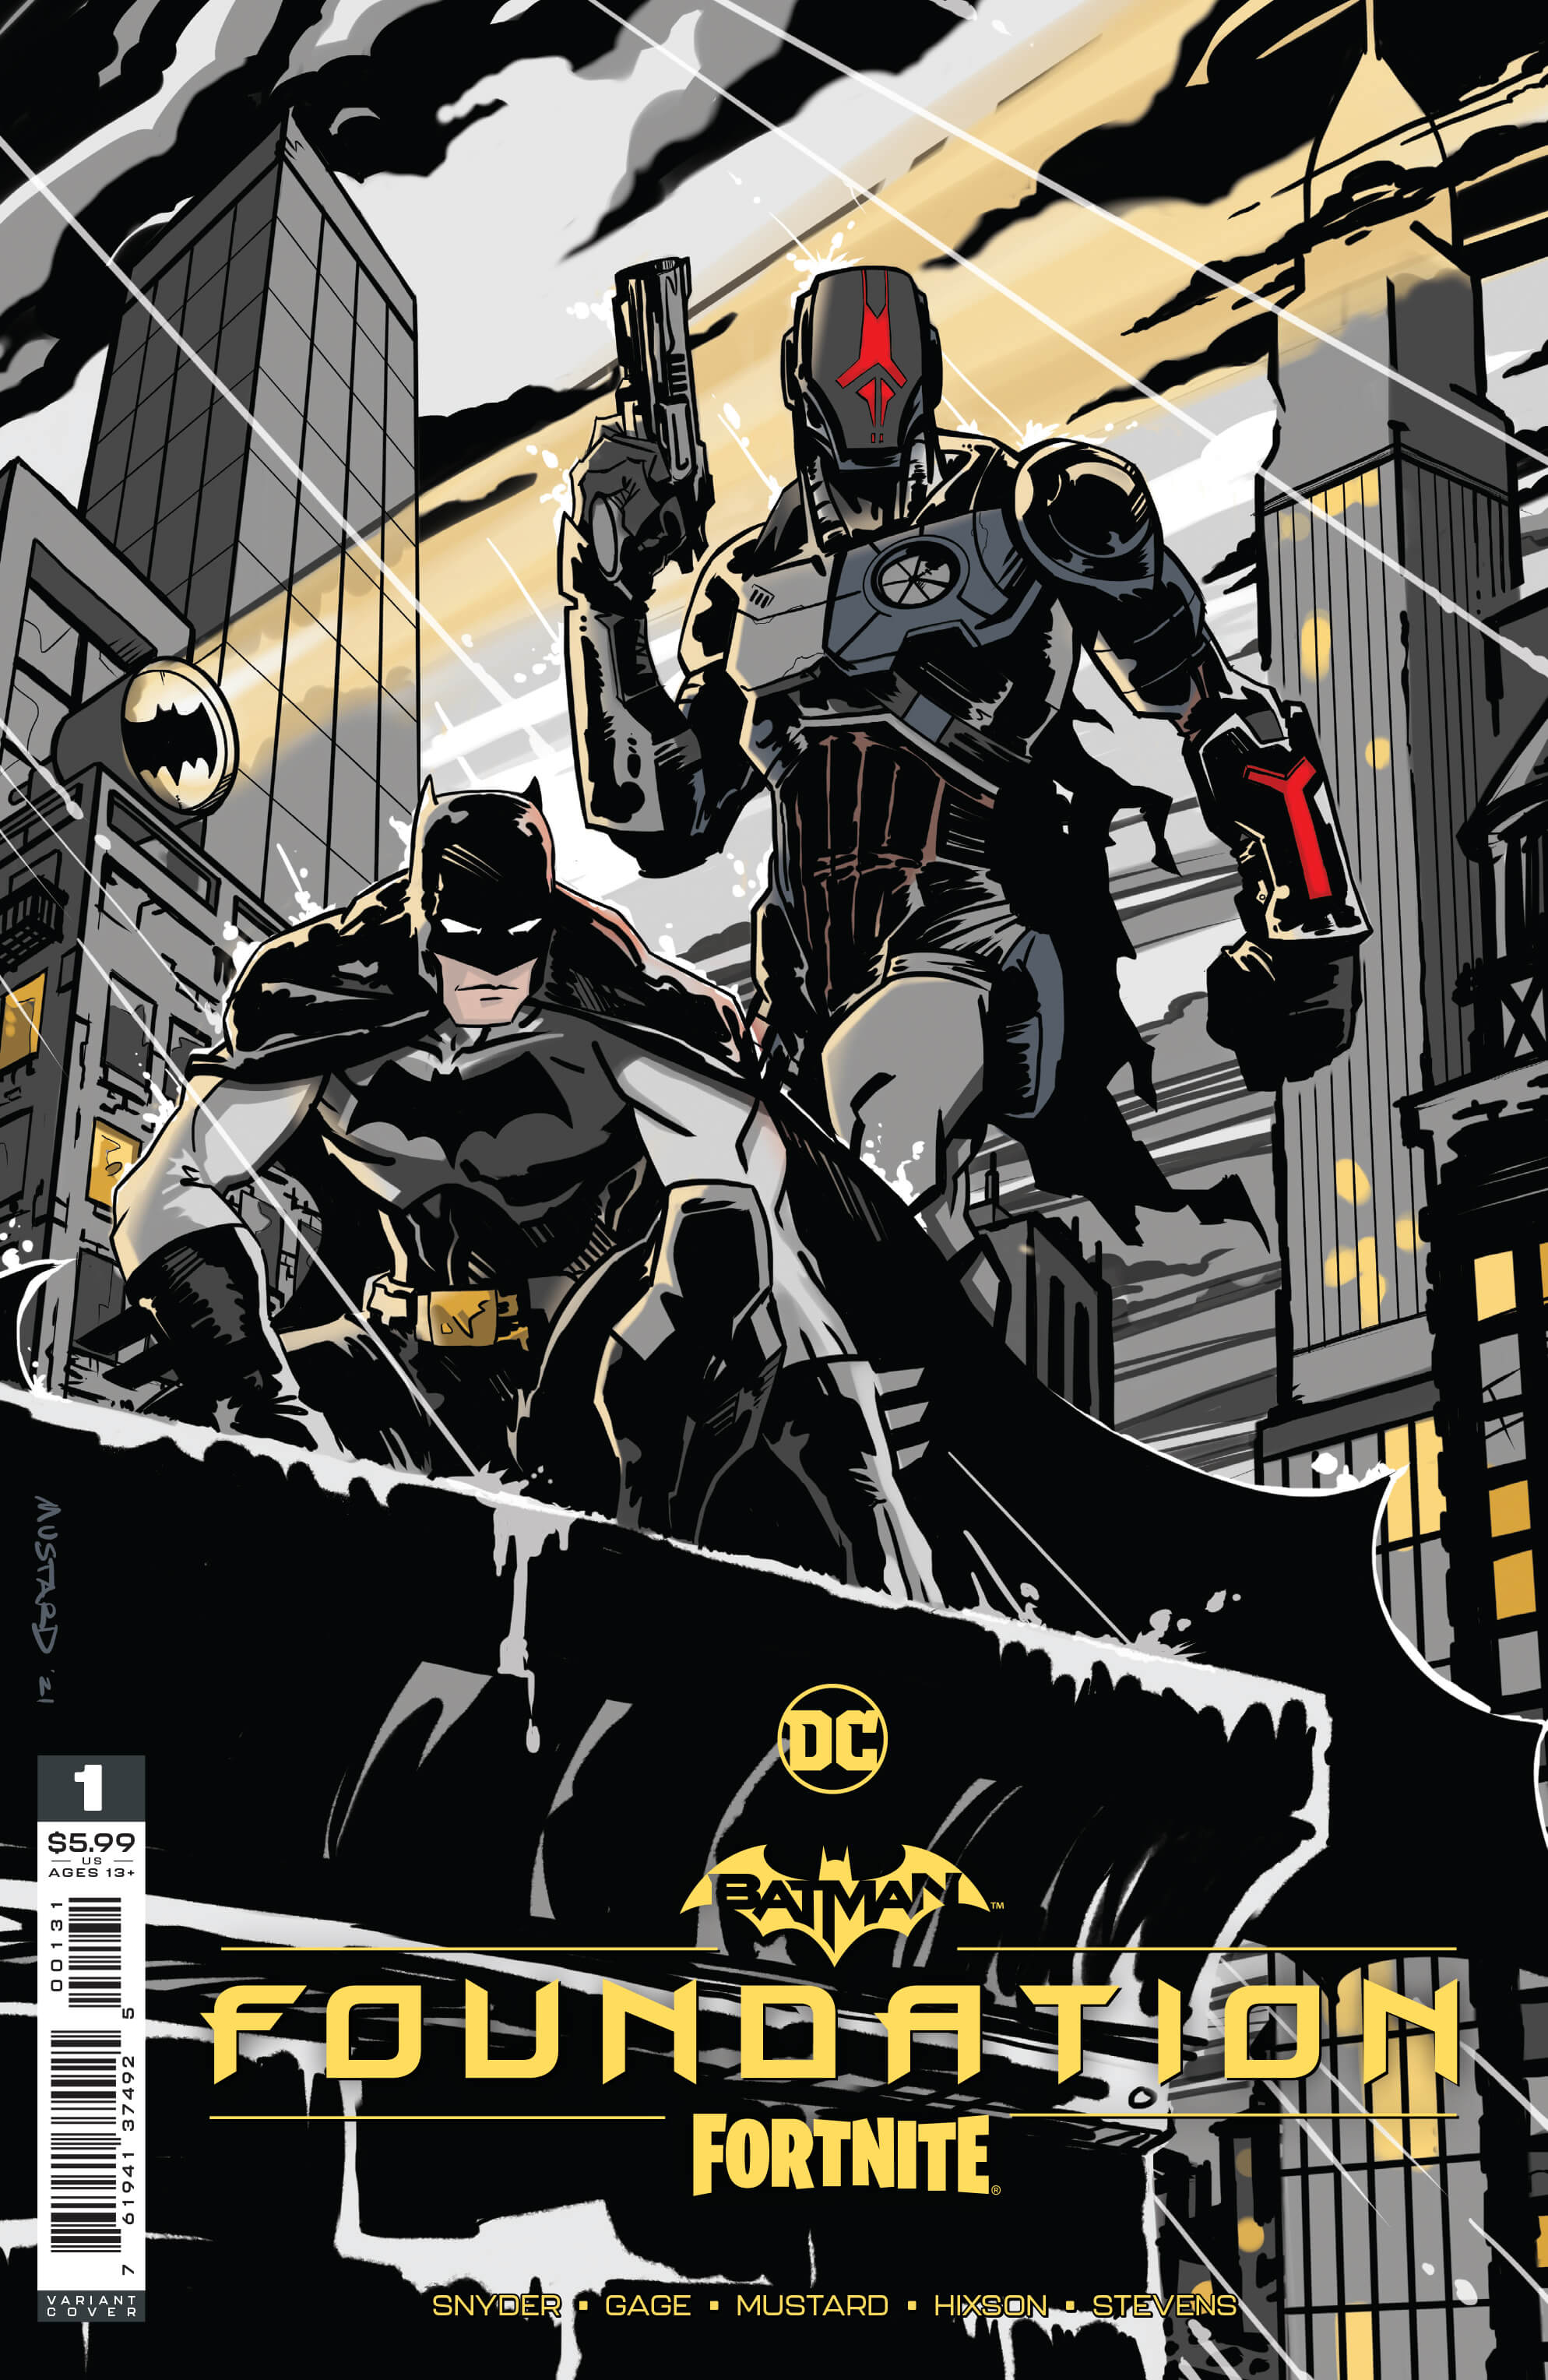 Fortnite announces new limited-edition Batman Comic, available October 26